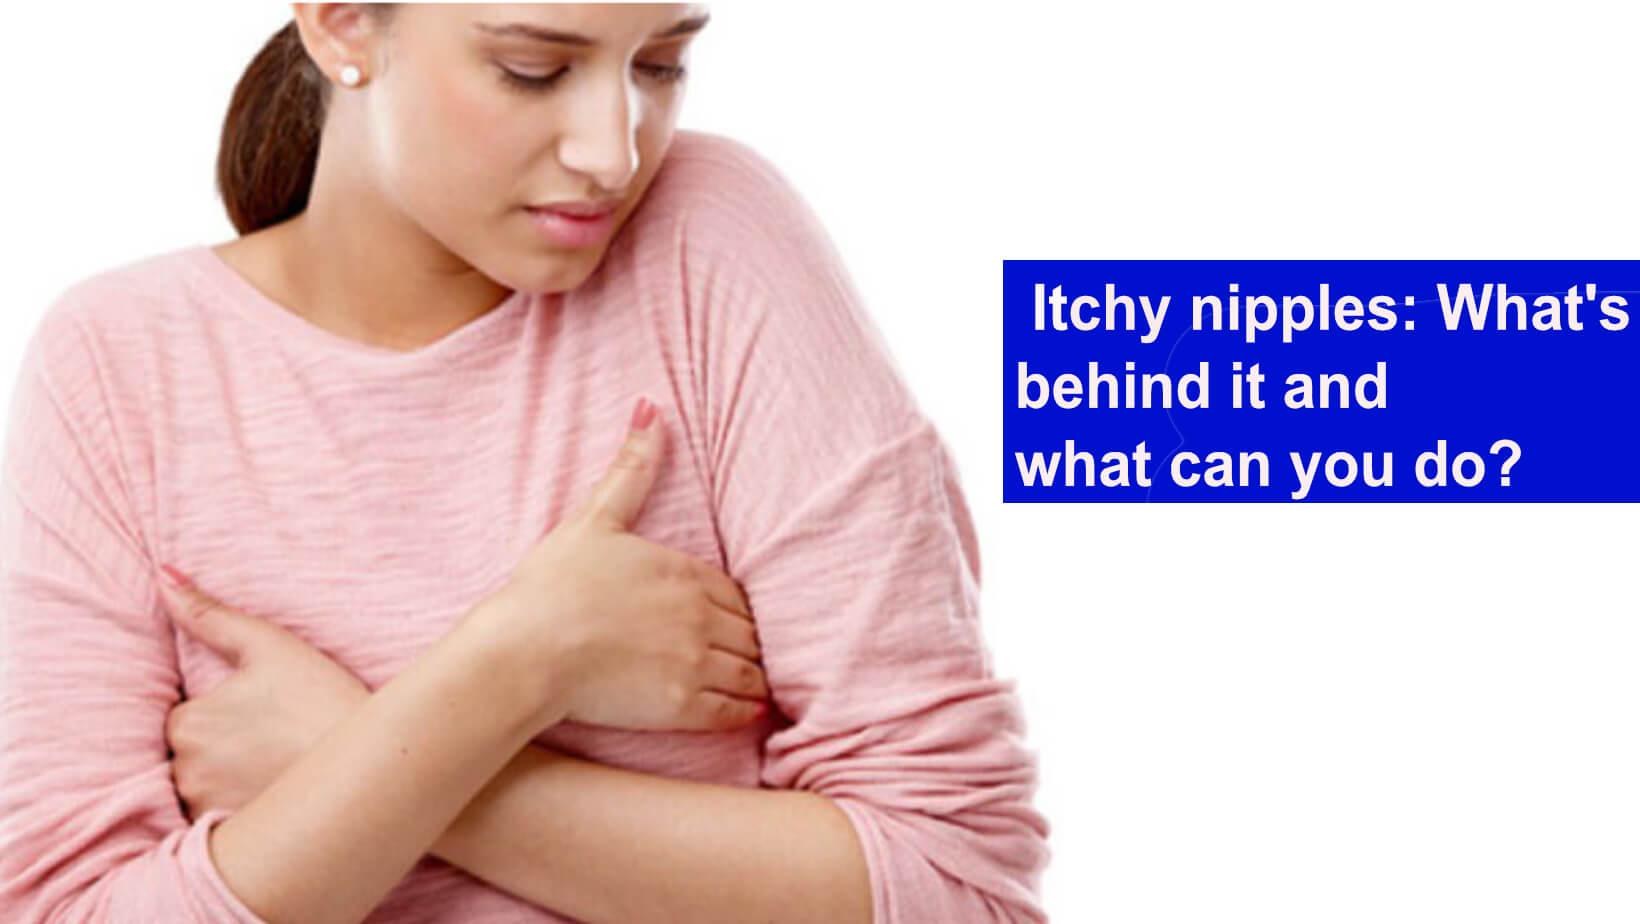 What does it mean when my breasts are always itchy and hurting? - Quora